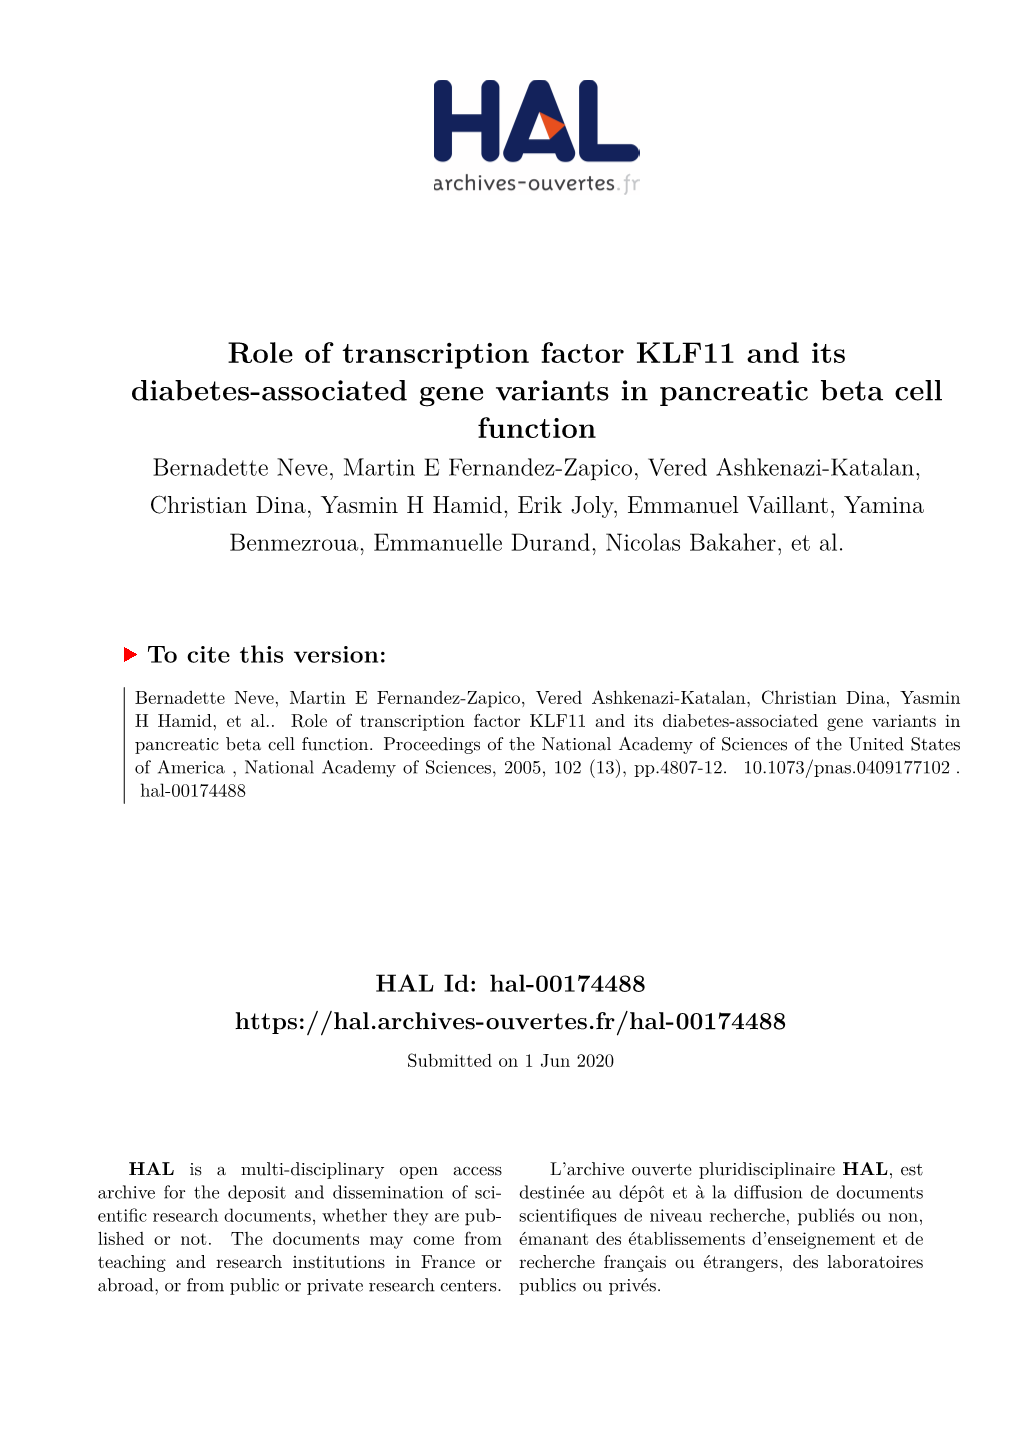 Role of Transcription Factor KLF11 and Its Diabetes